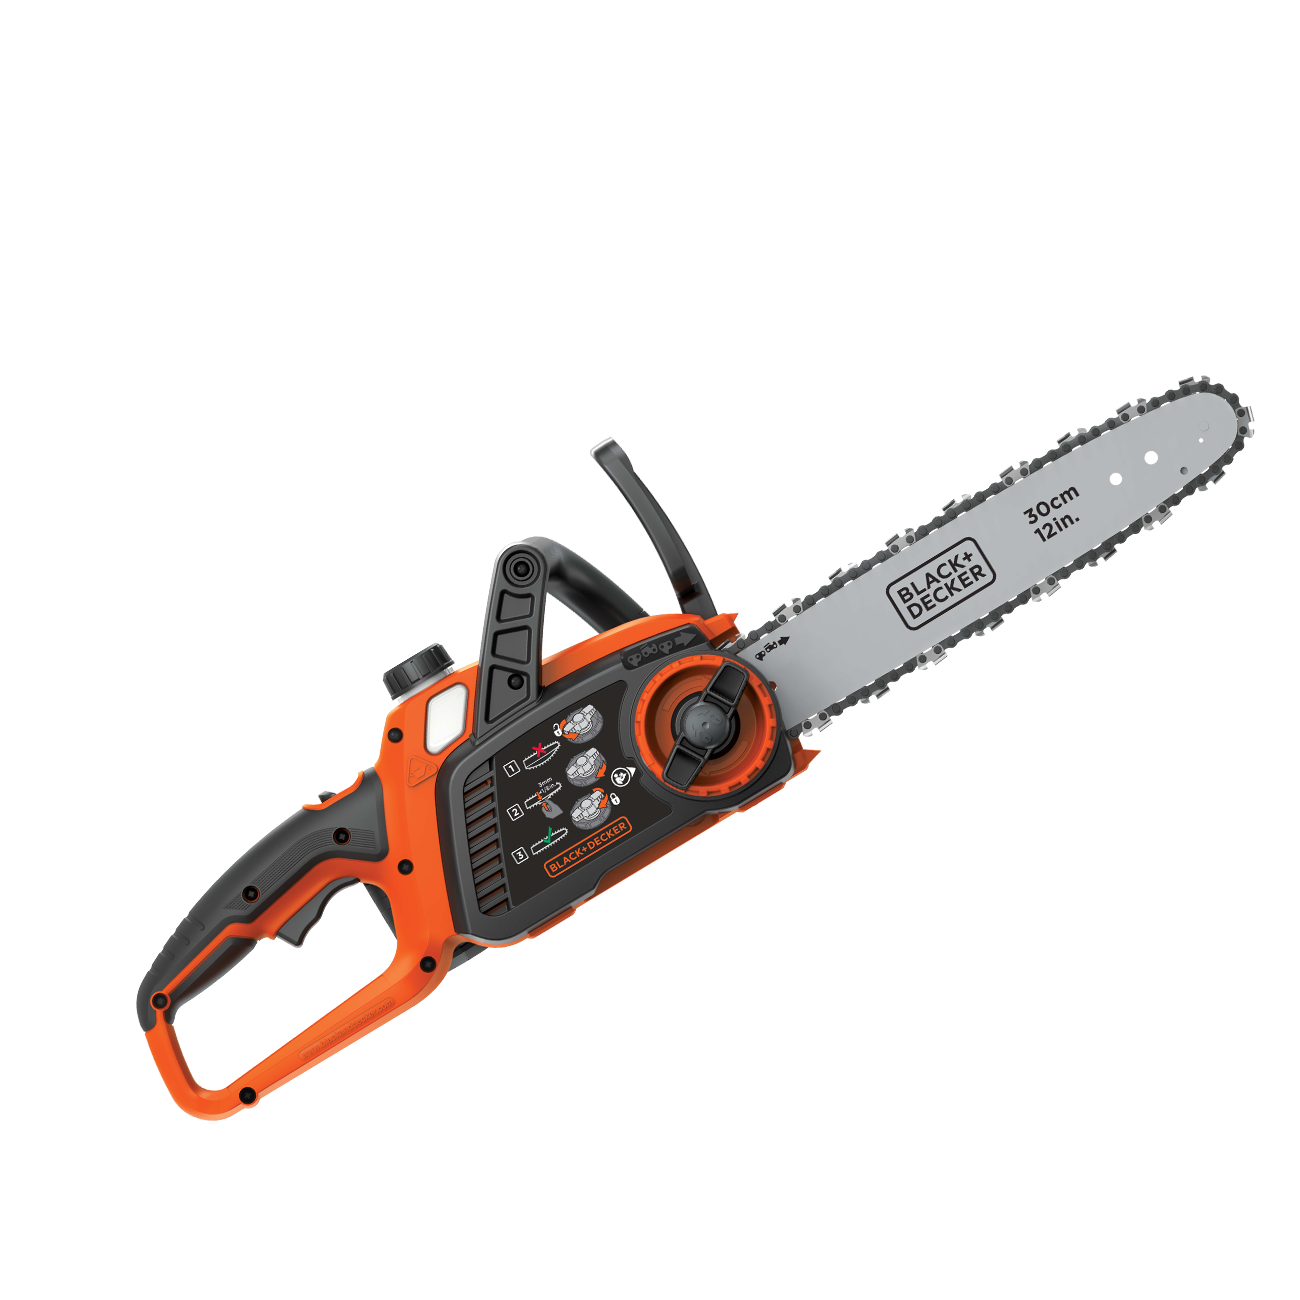 Black+decker LCS1240B 40V Max Cordless 12 in. Lithium-Ion Chainsaw (Bare Tool)